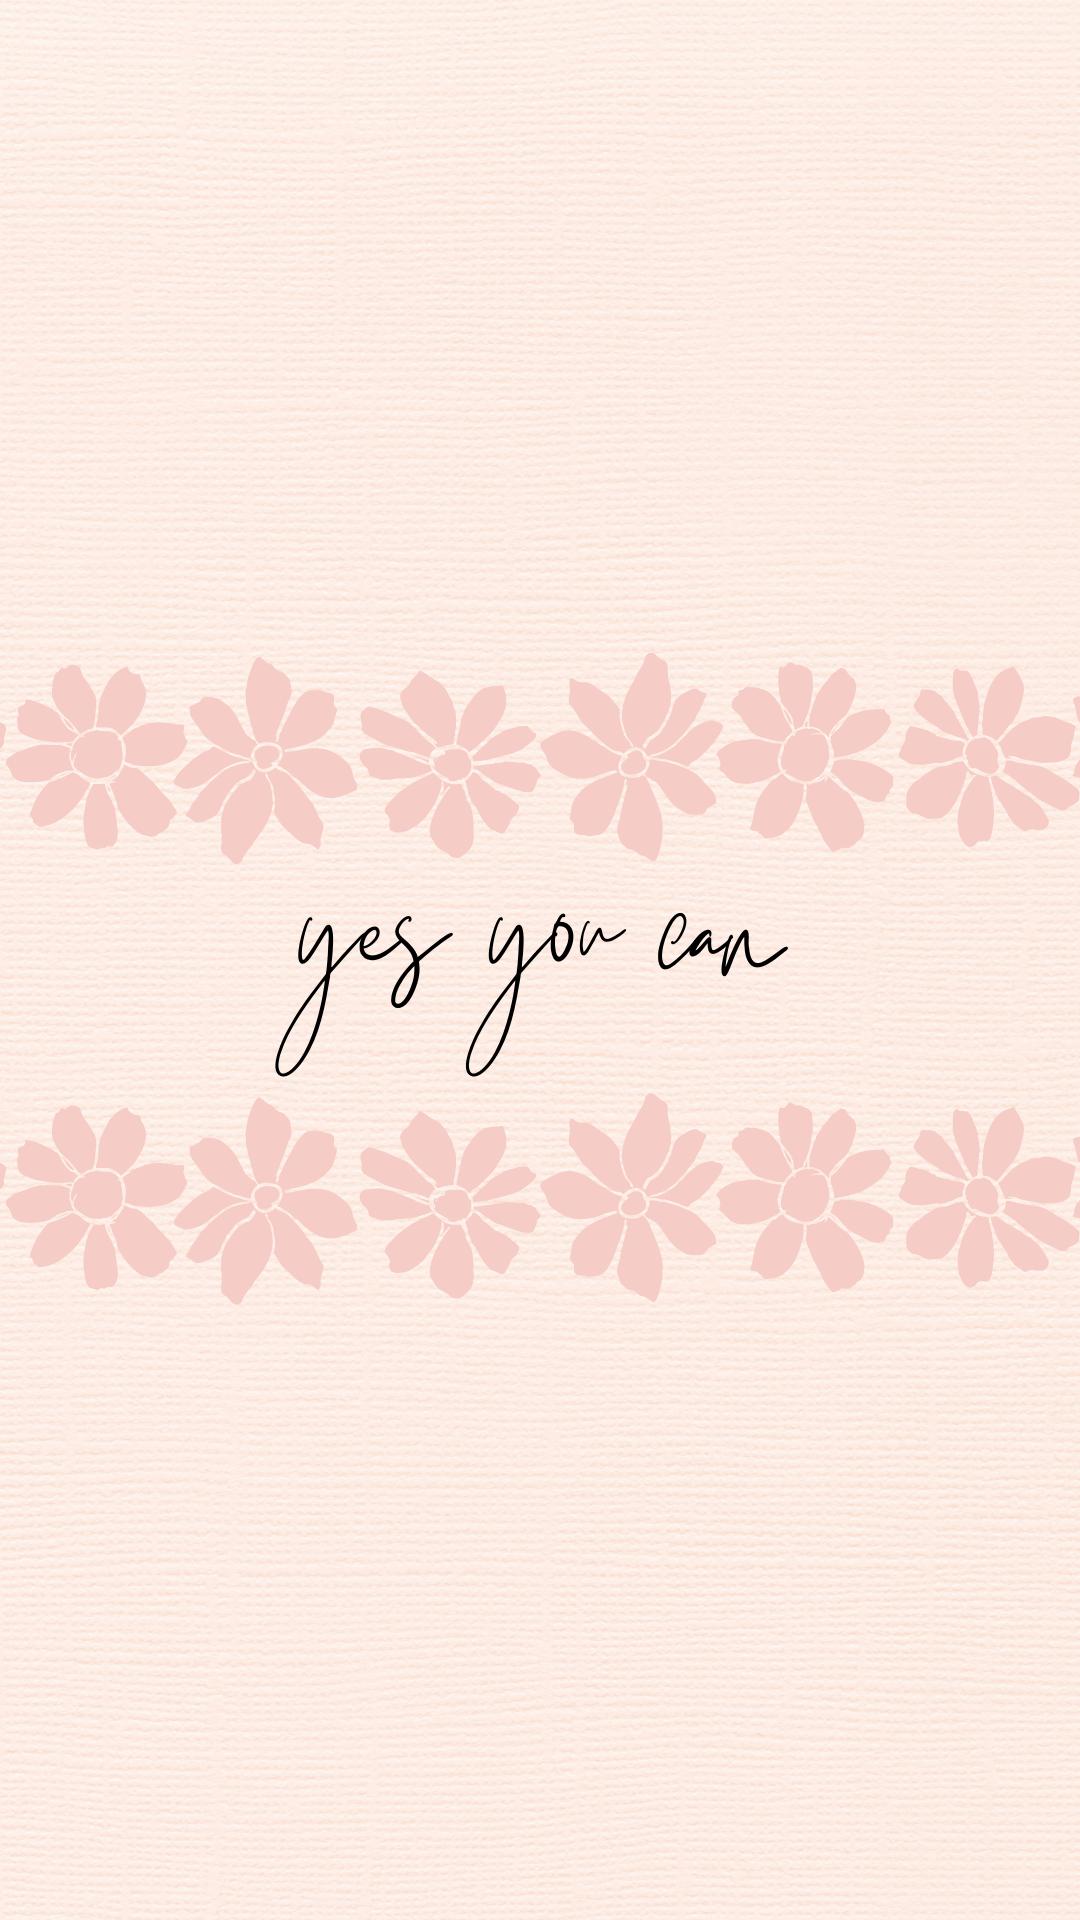 IPhone wallpaper with flowers and the text 